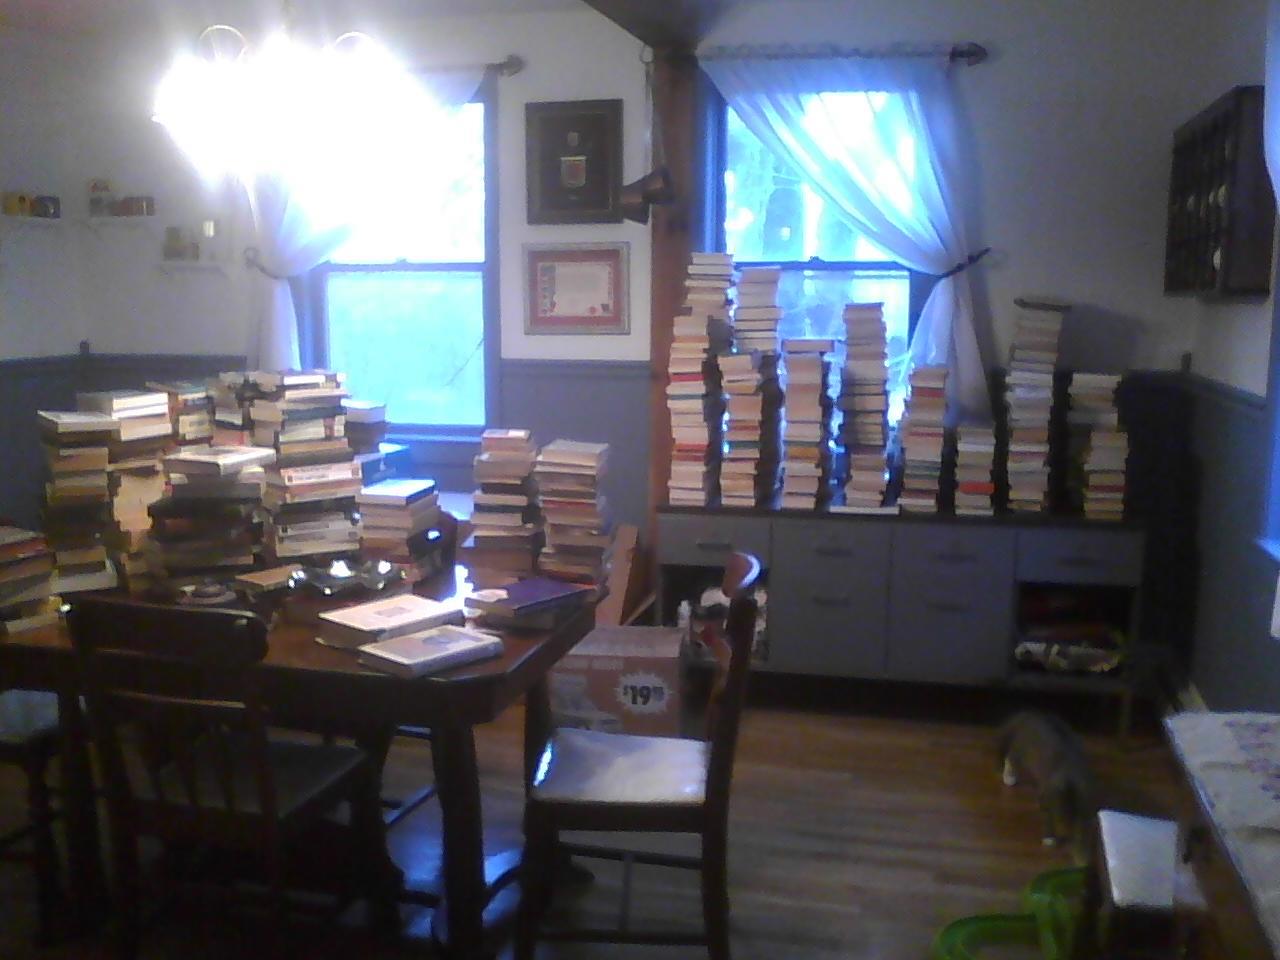 Large stack of books